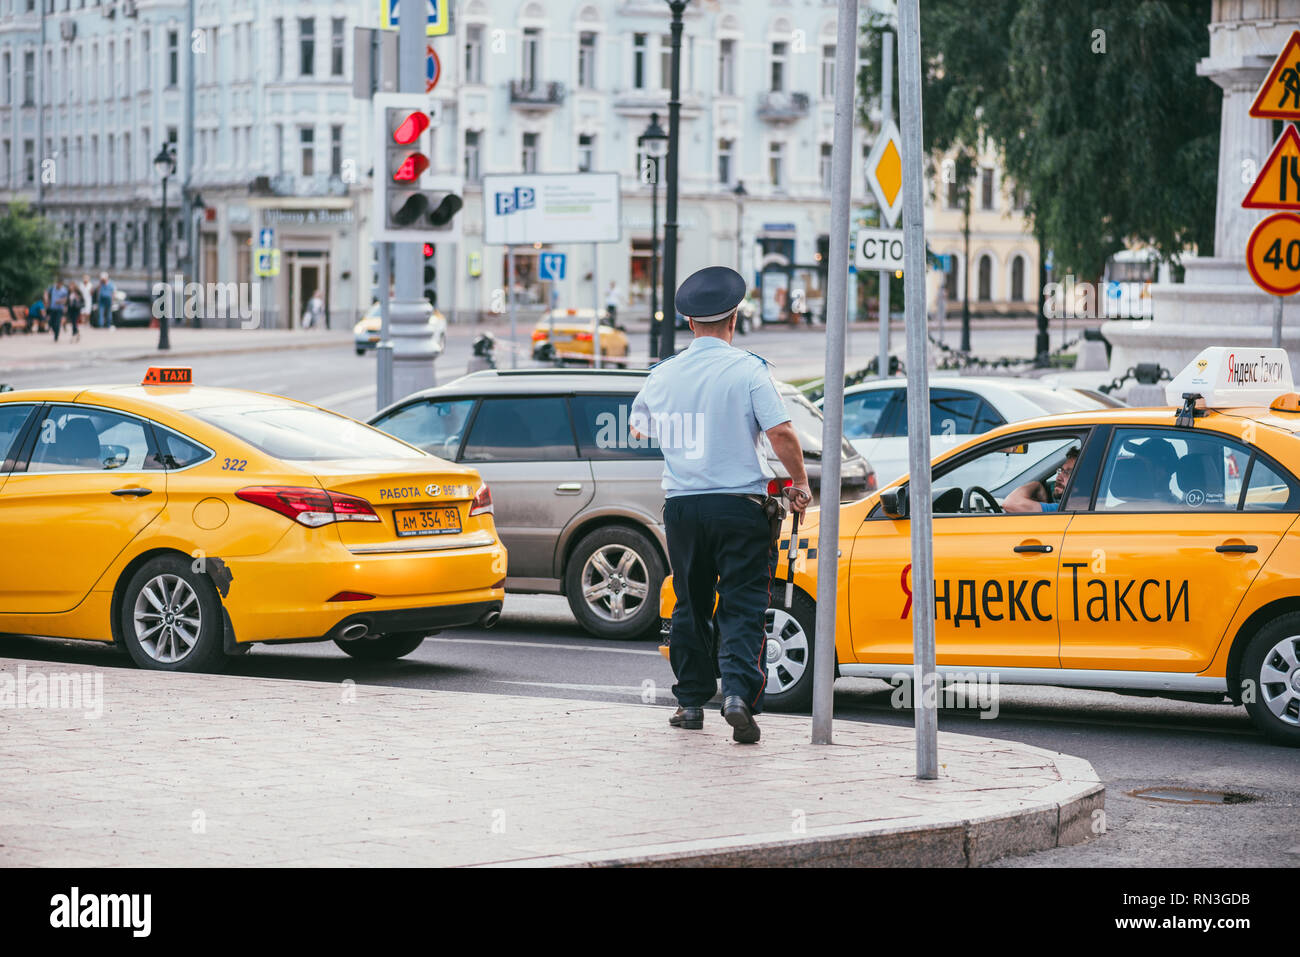 MOSCOW, RUSSIN FEDERATION - JULY 28, 2017: The inspector policeman stopped Yandex taxi driver, in Moscow in Russia during summer season - Image Stock Photo